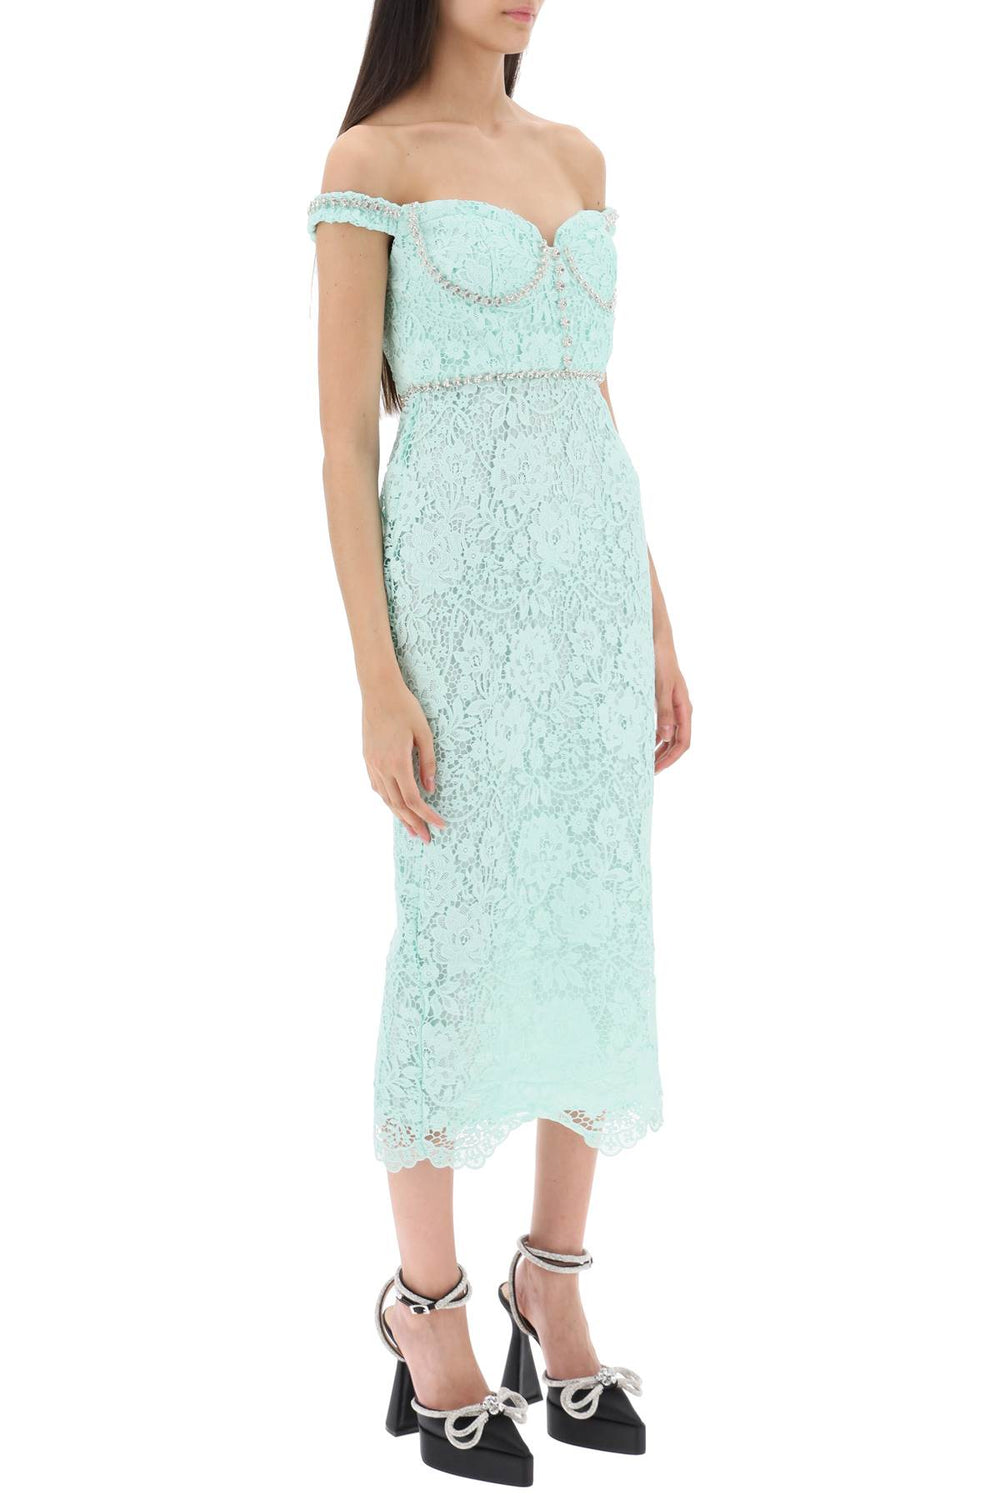 midi dress in floral lace with crystals-1